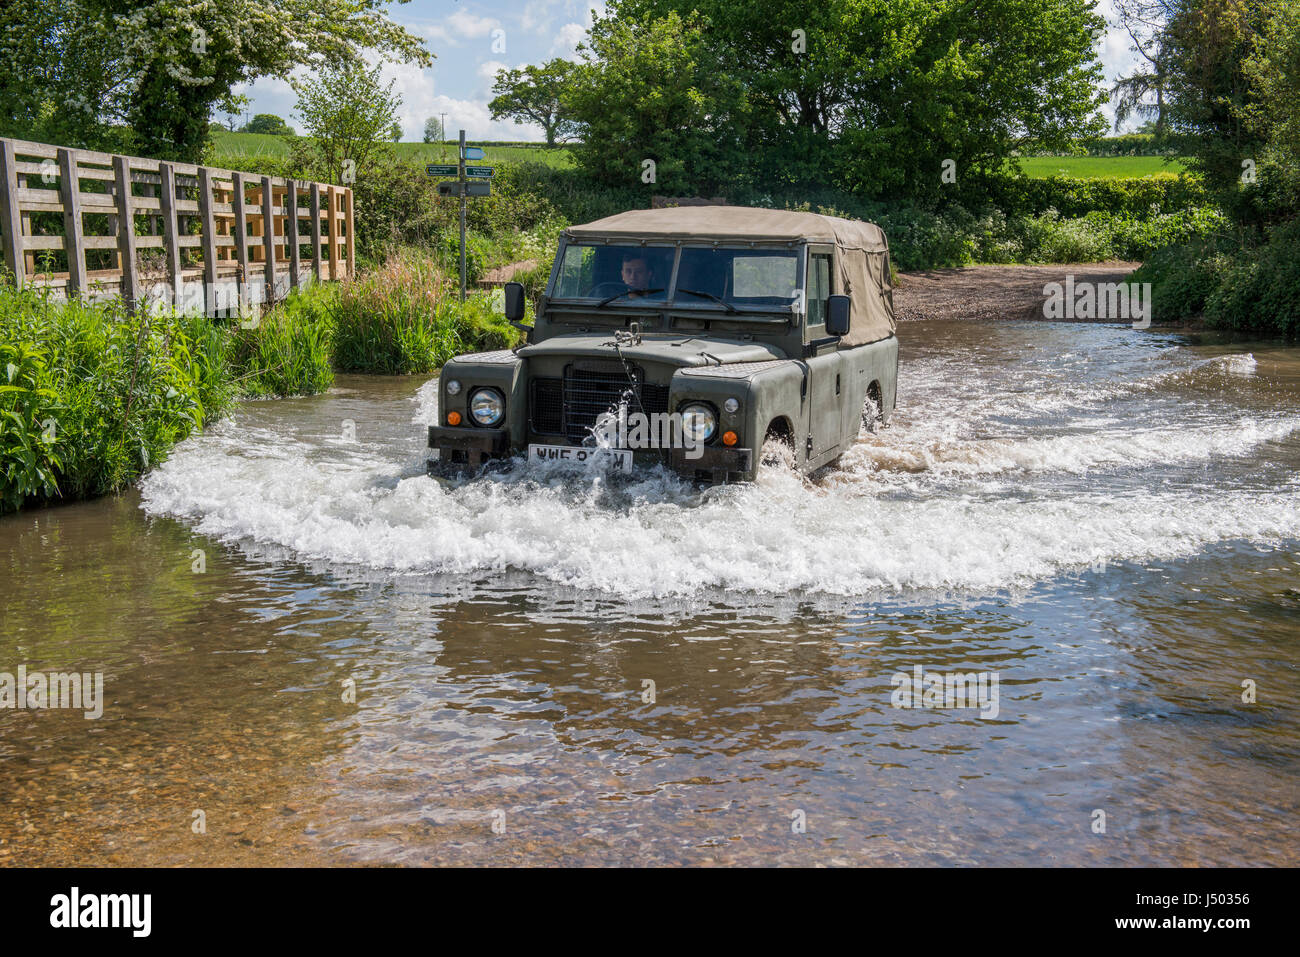 Model released image of a man driving a 1973 ex army Land Rover Series 3 Long Wheel Base into the river VER which forms a ford at Redbournbury, Herts. Stock Photo